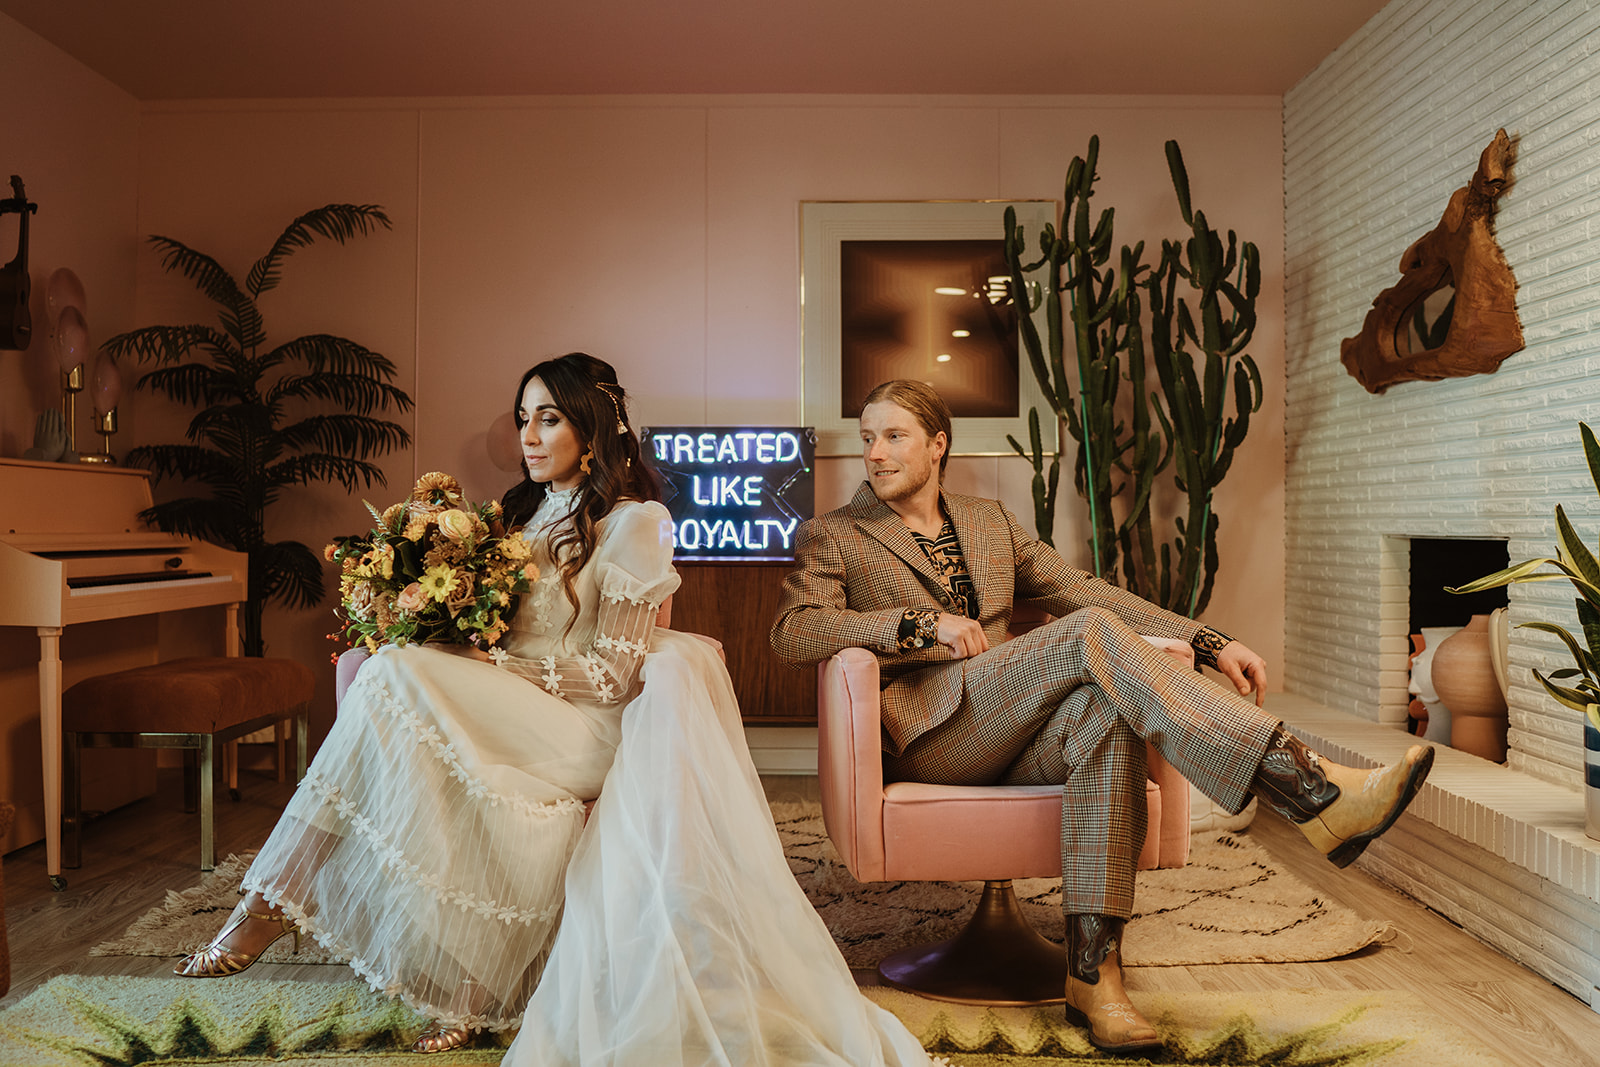 Retro 70's styled bride and groom in a Palm Springs inspired room